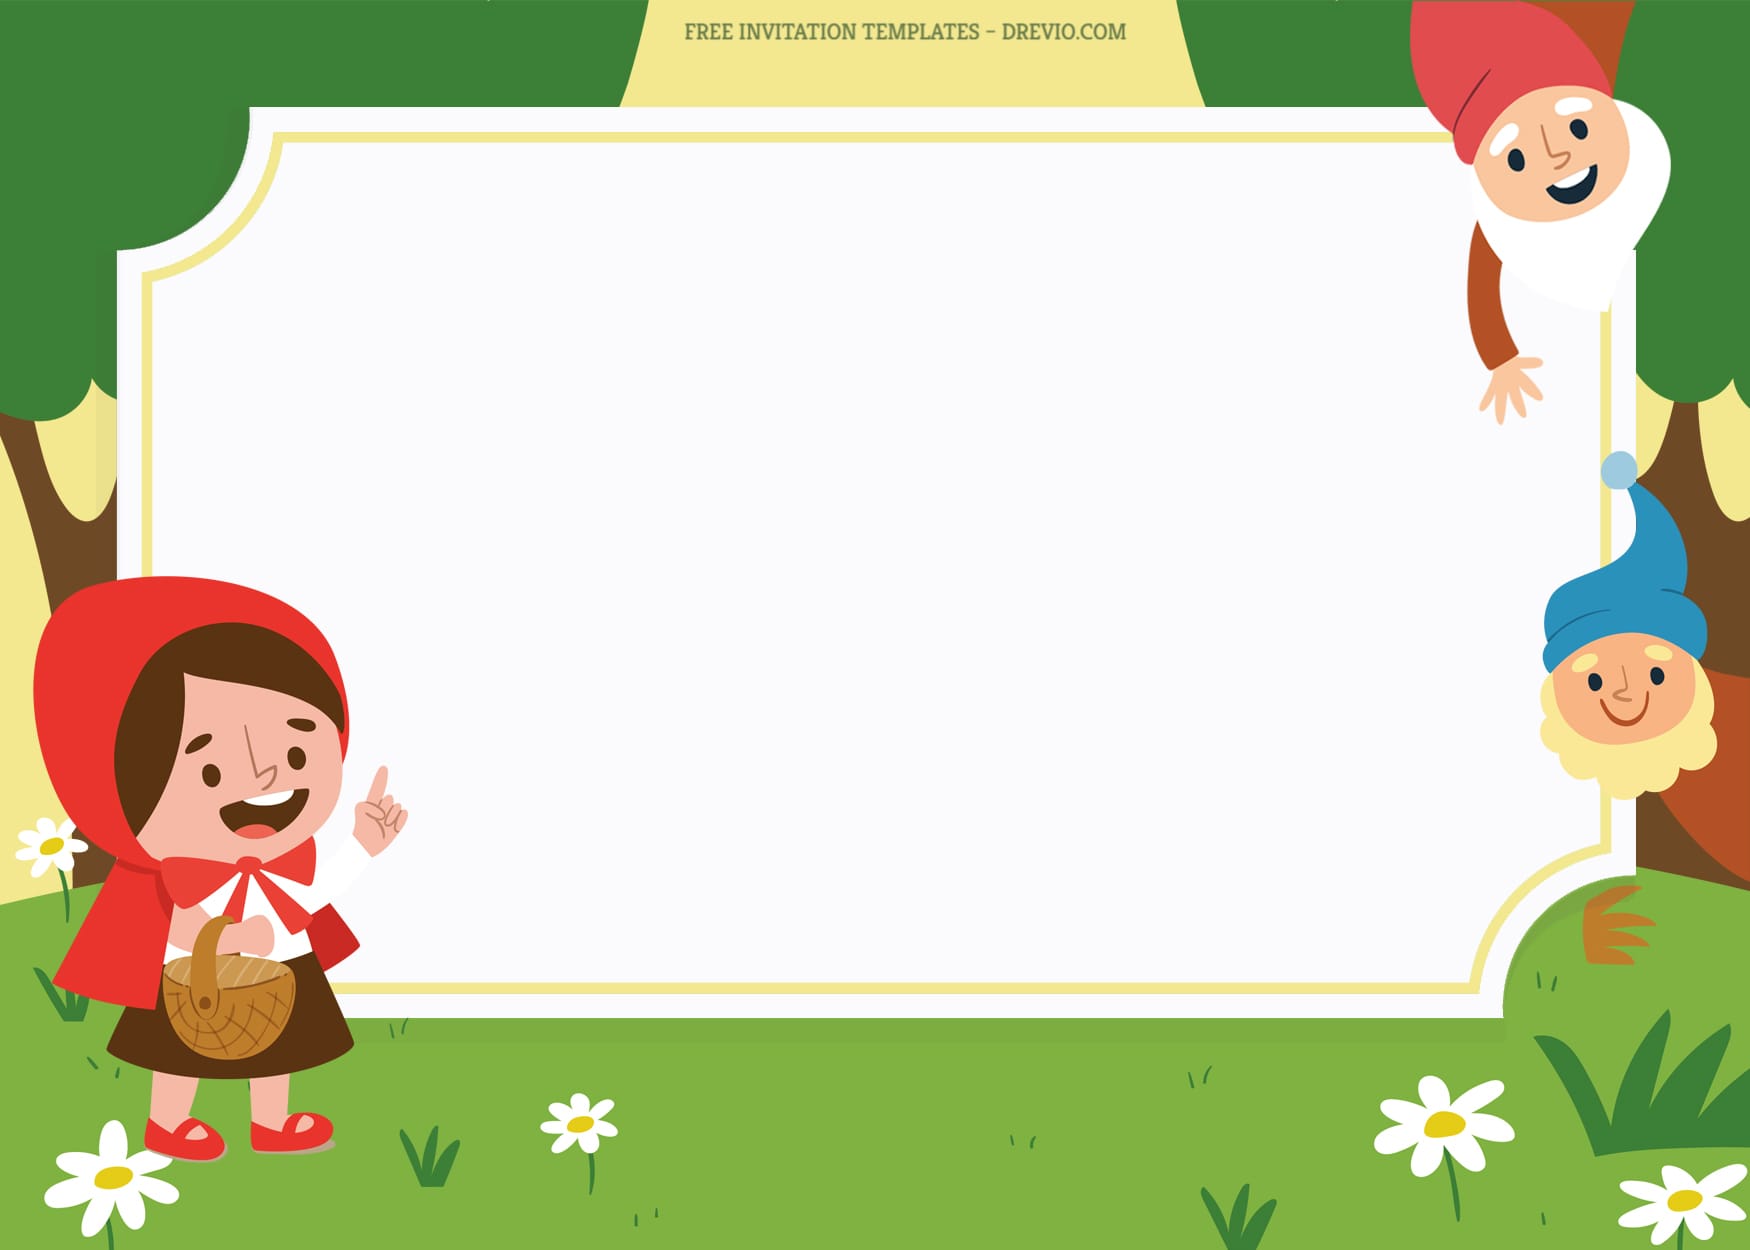 9+ Cute Folklore Cartoon Birthday Invitation Templates With Red Hood And Hanging Dwarf